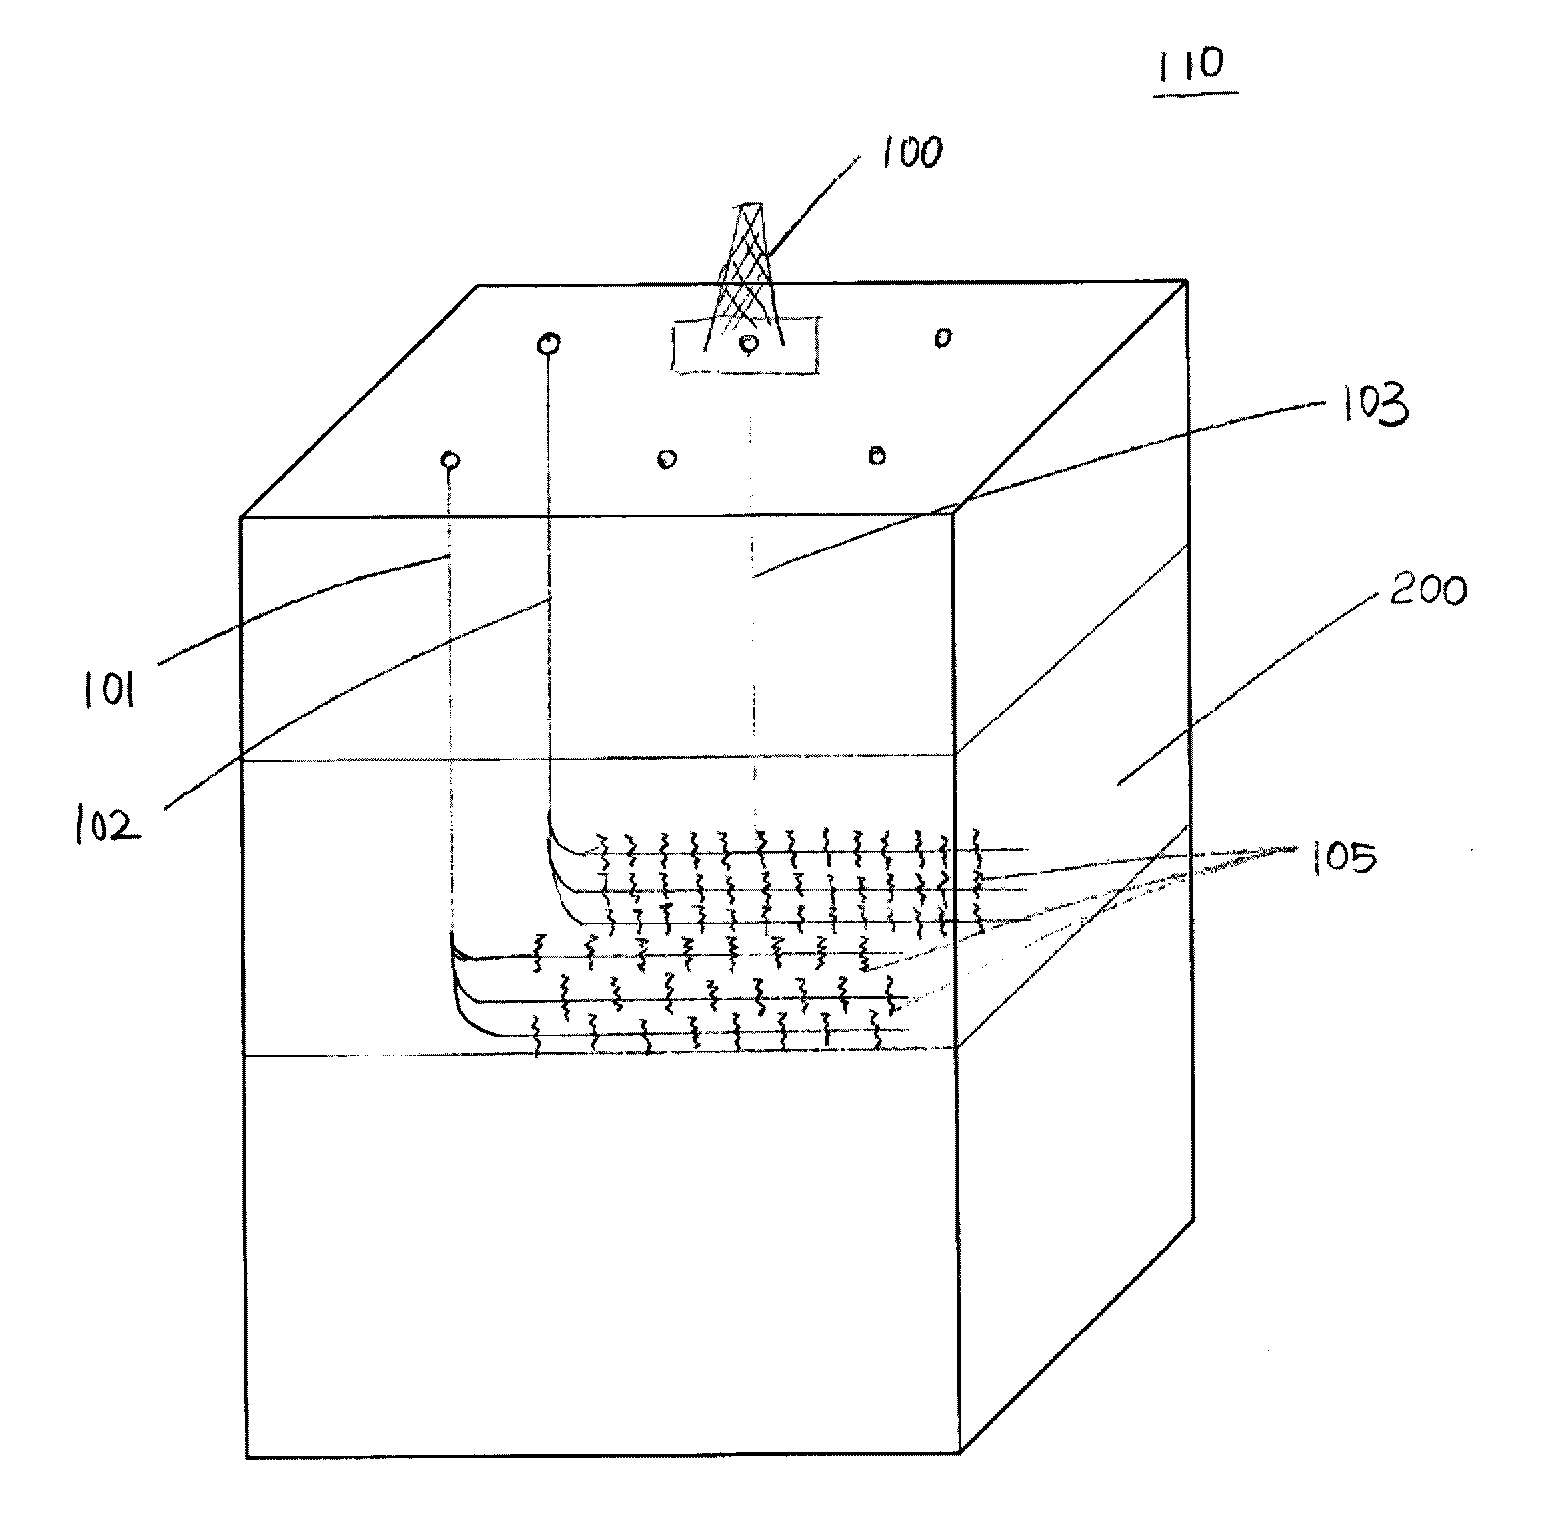 Method of geometric evaluation of hydraulic fractures